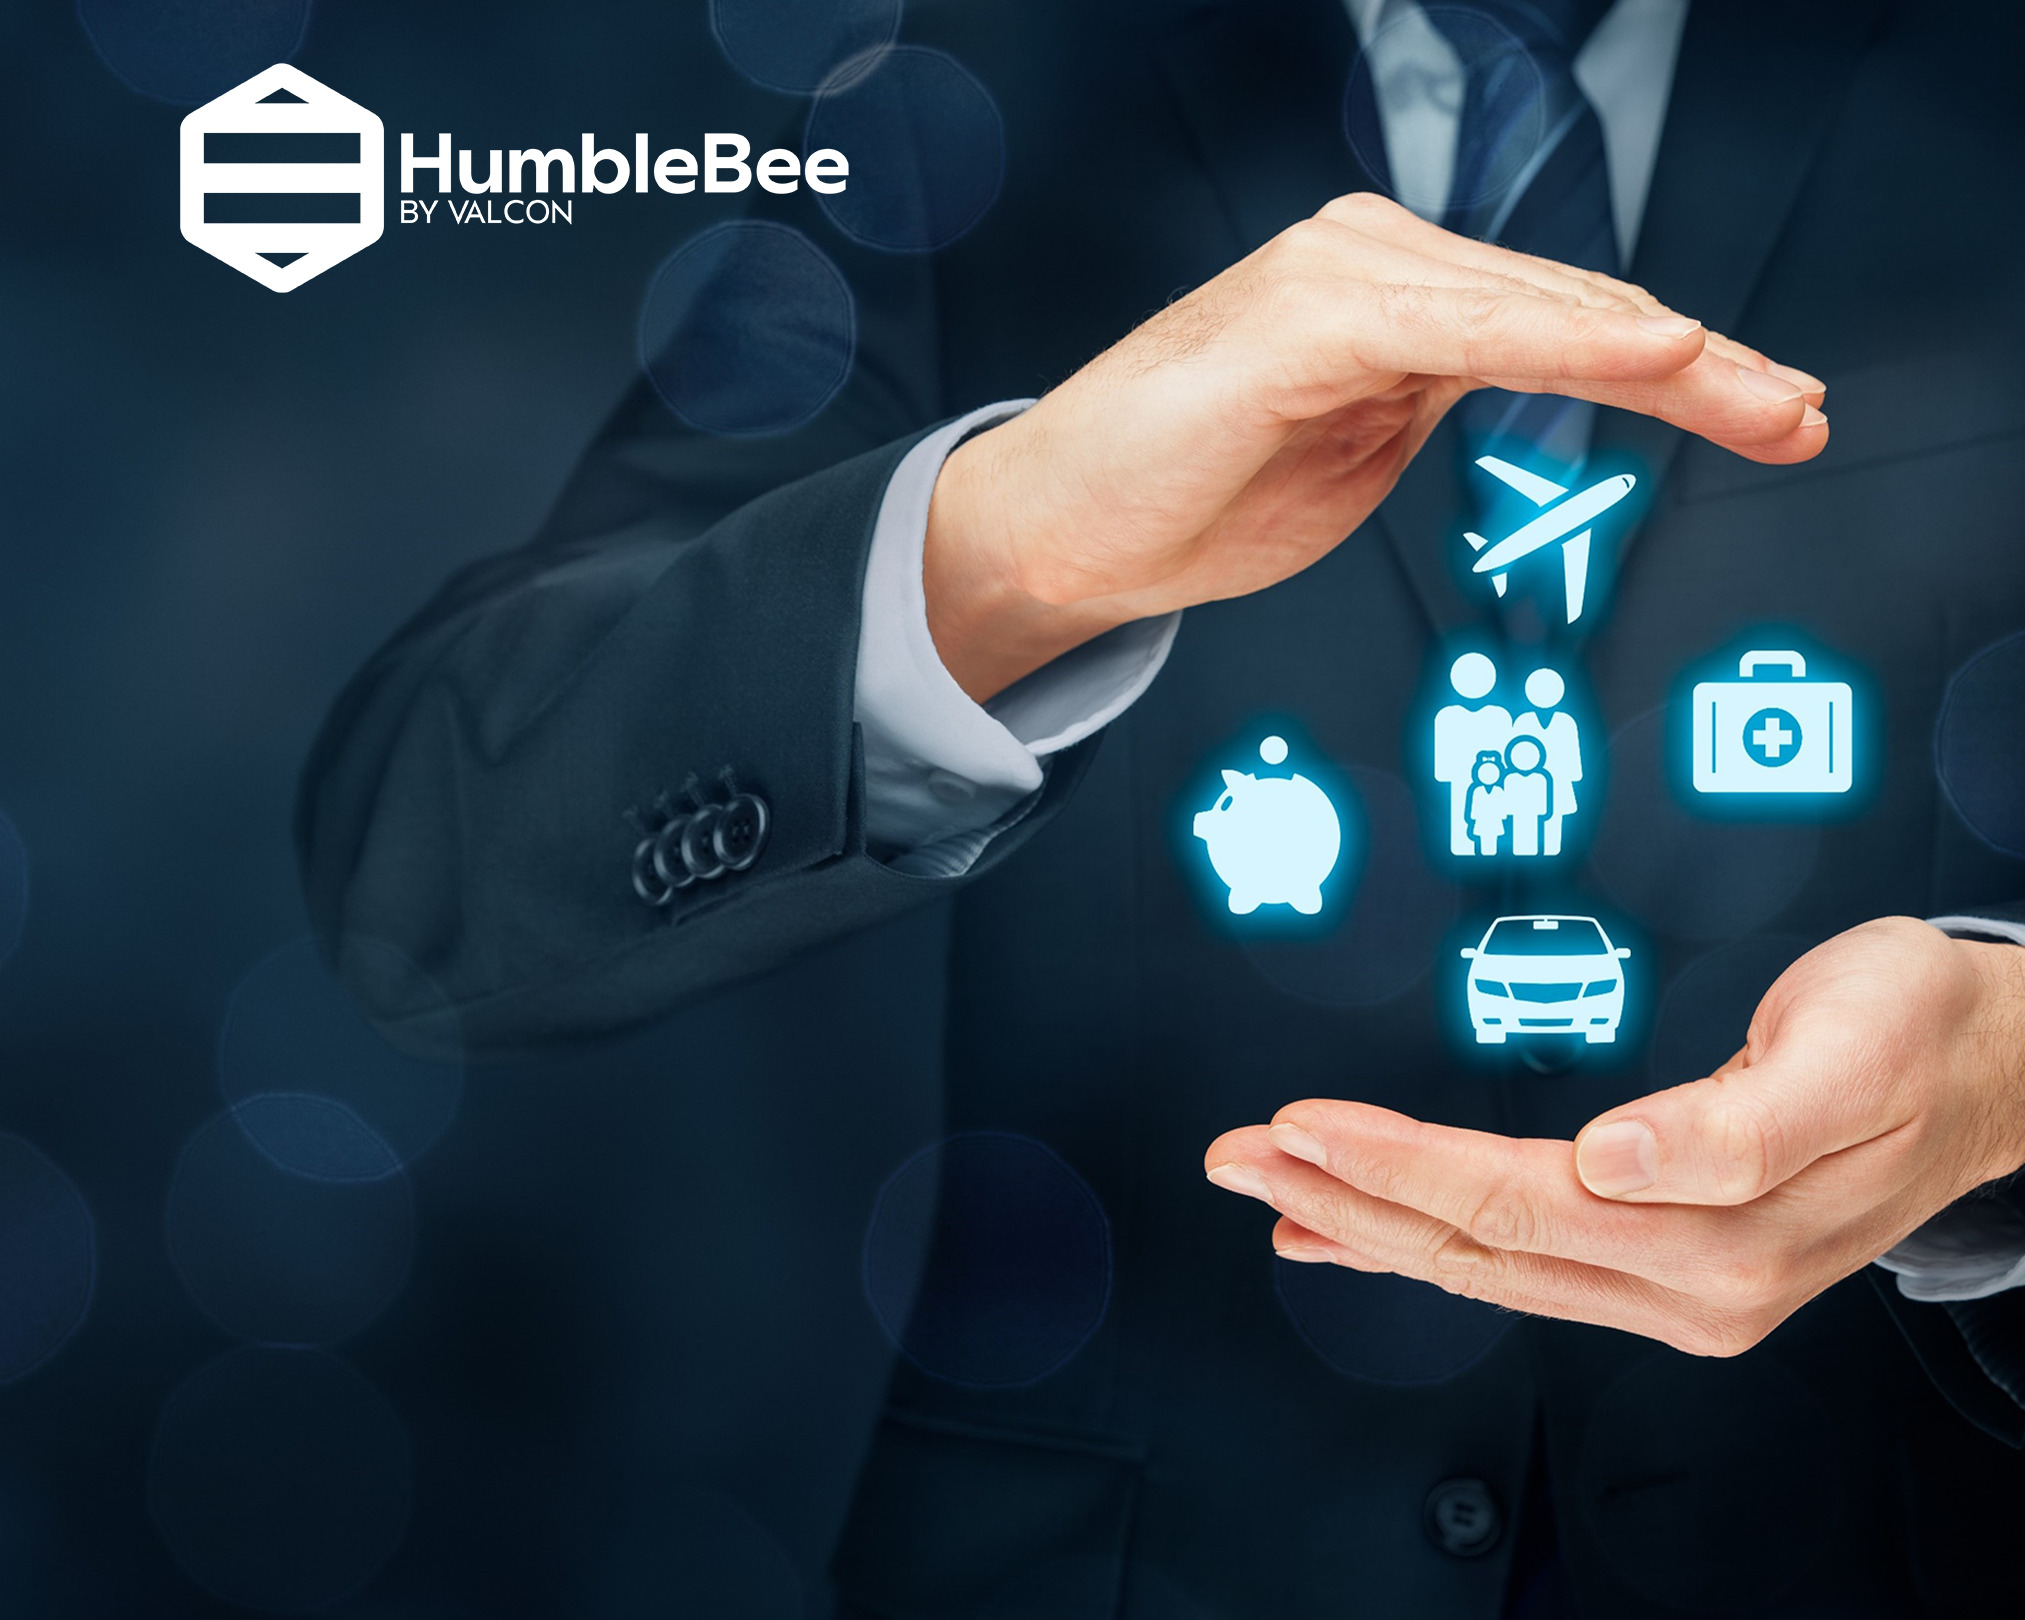 Humblebee by Valcon logo with abstract image of hands and icons